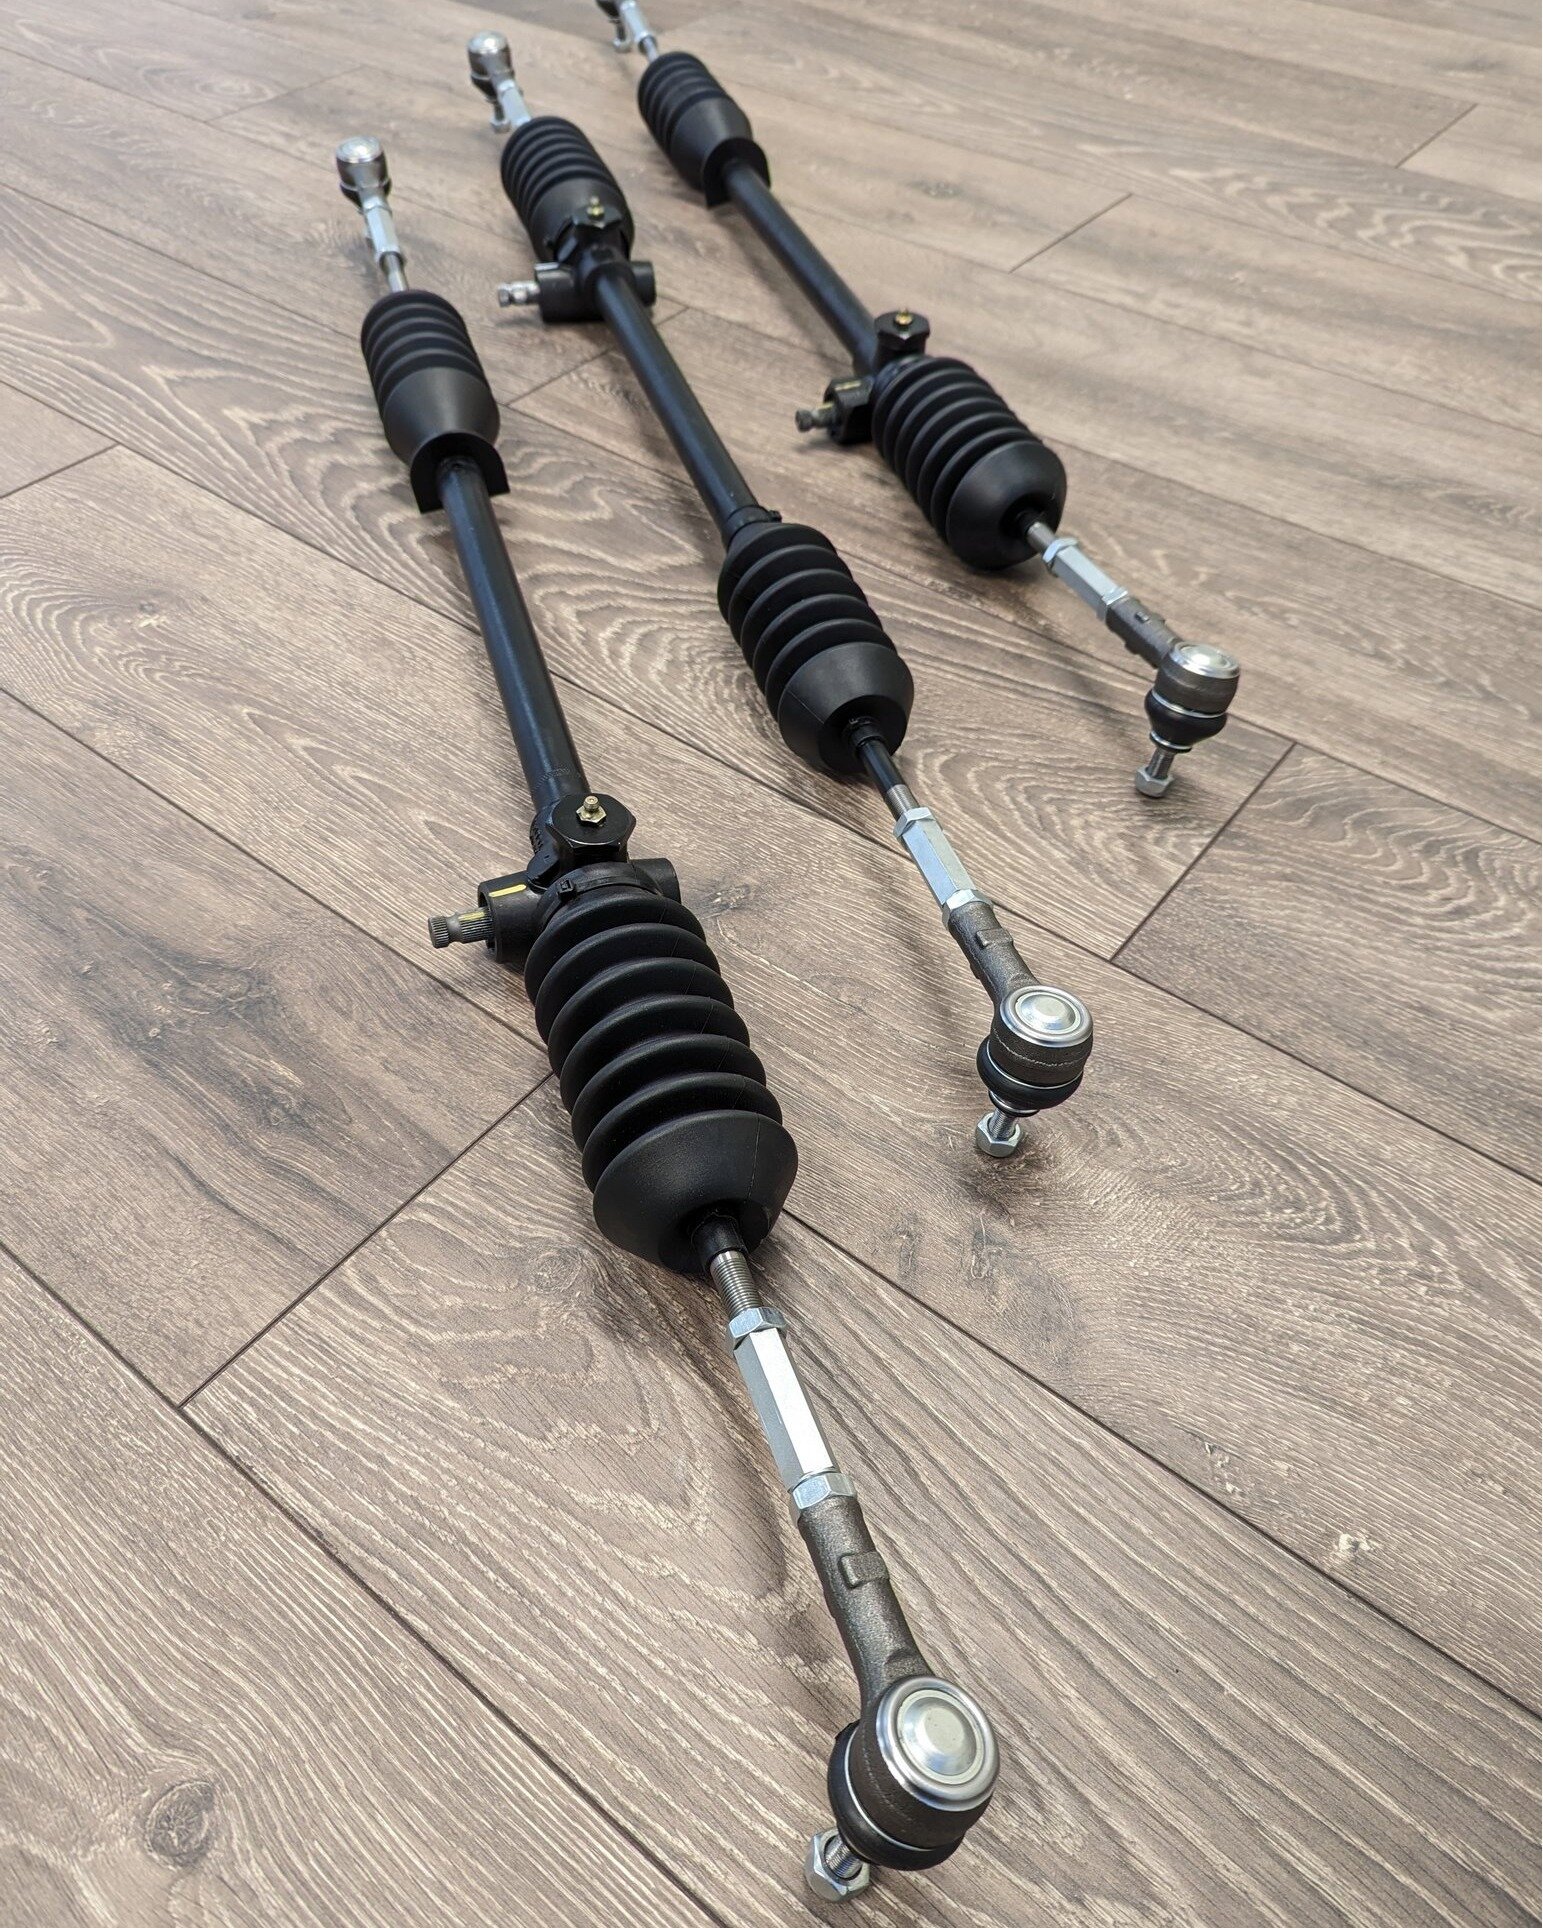 Original Triumph steering racks we've machined and re-built to address bump steer often found in TVR Grantura MKIII's and TVR Griffith 200/400 cars.

Click the link in our bio to find out more.